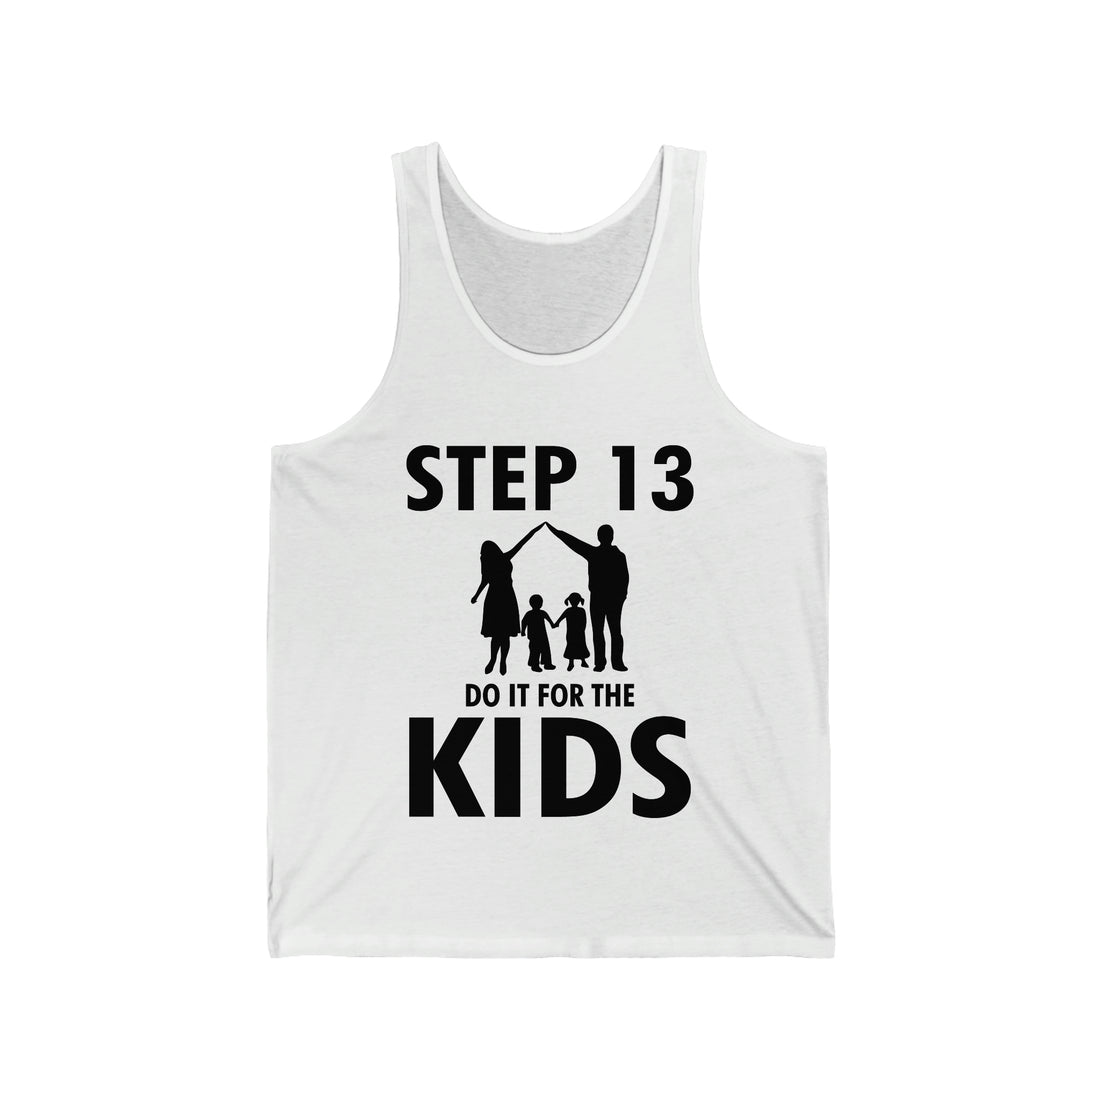 Step 13 Do It For The Kids - Unisex Jersey Tank Top